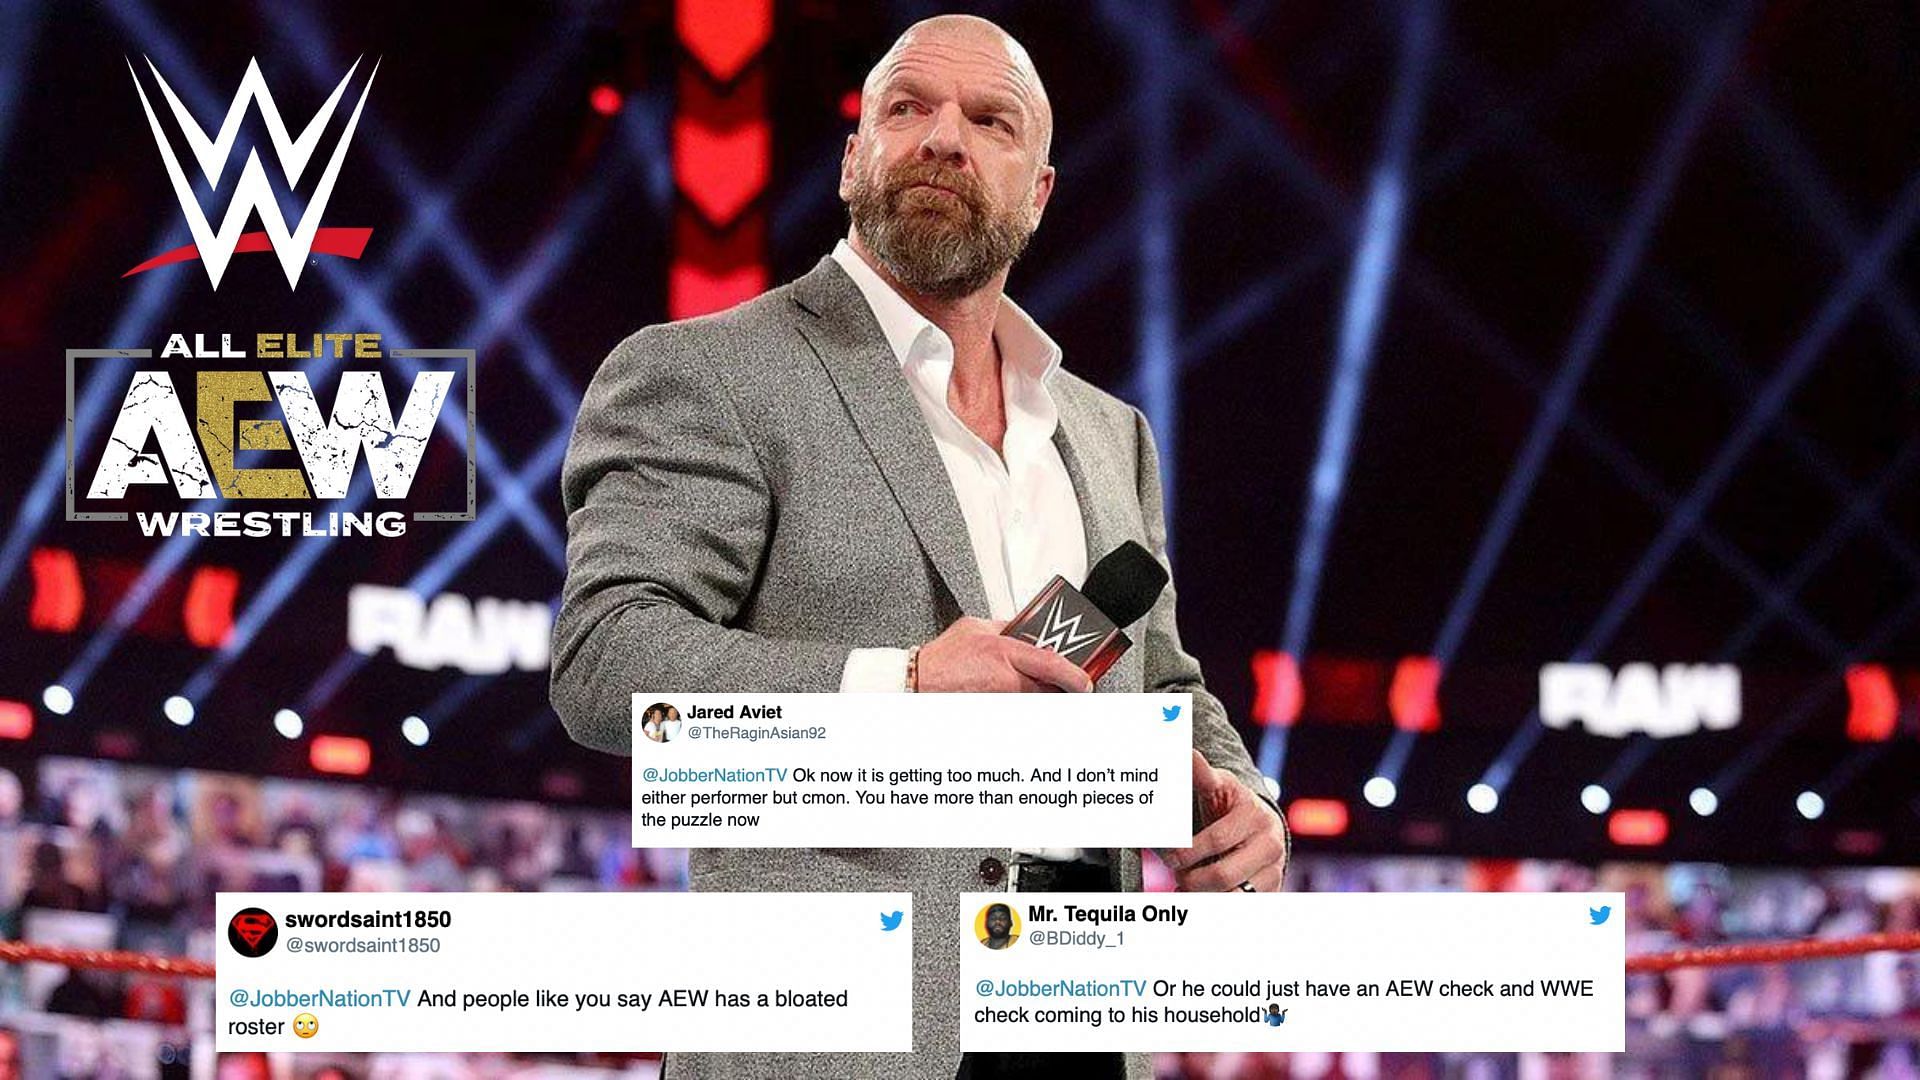 WWE CCO Triple H has been on a signing spree of late